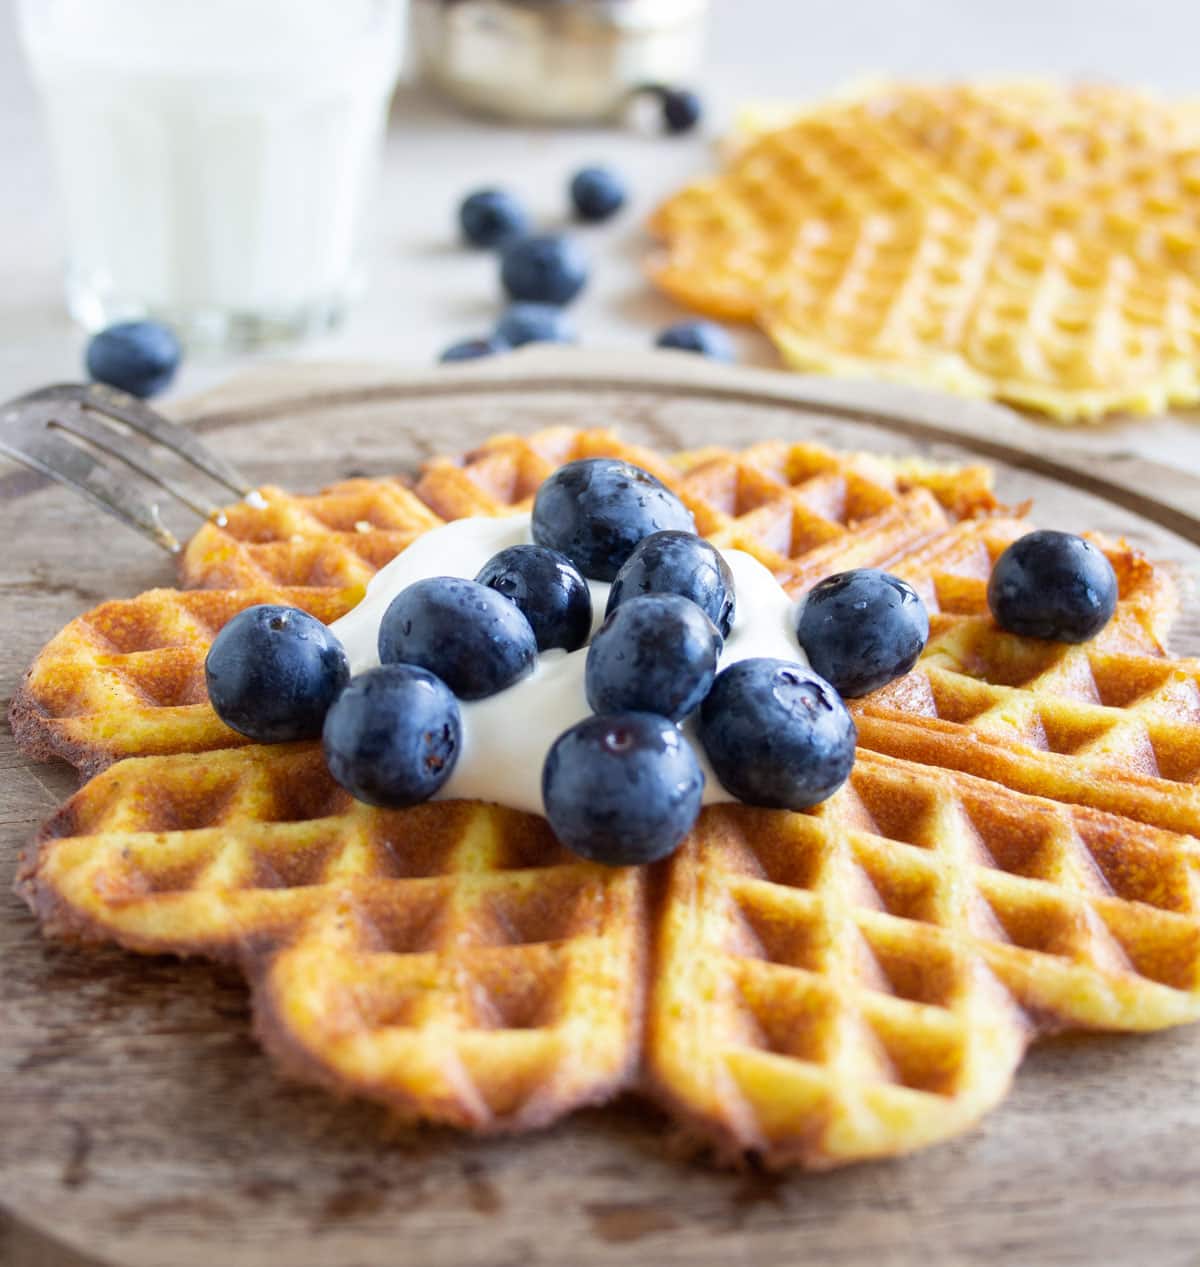 A heart-shaped waffle topped with sour cream and blueberries.